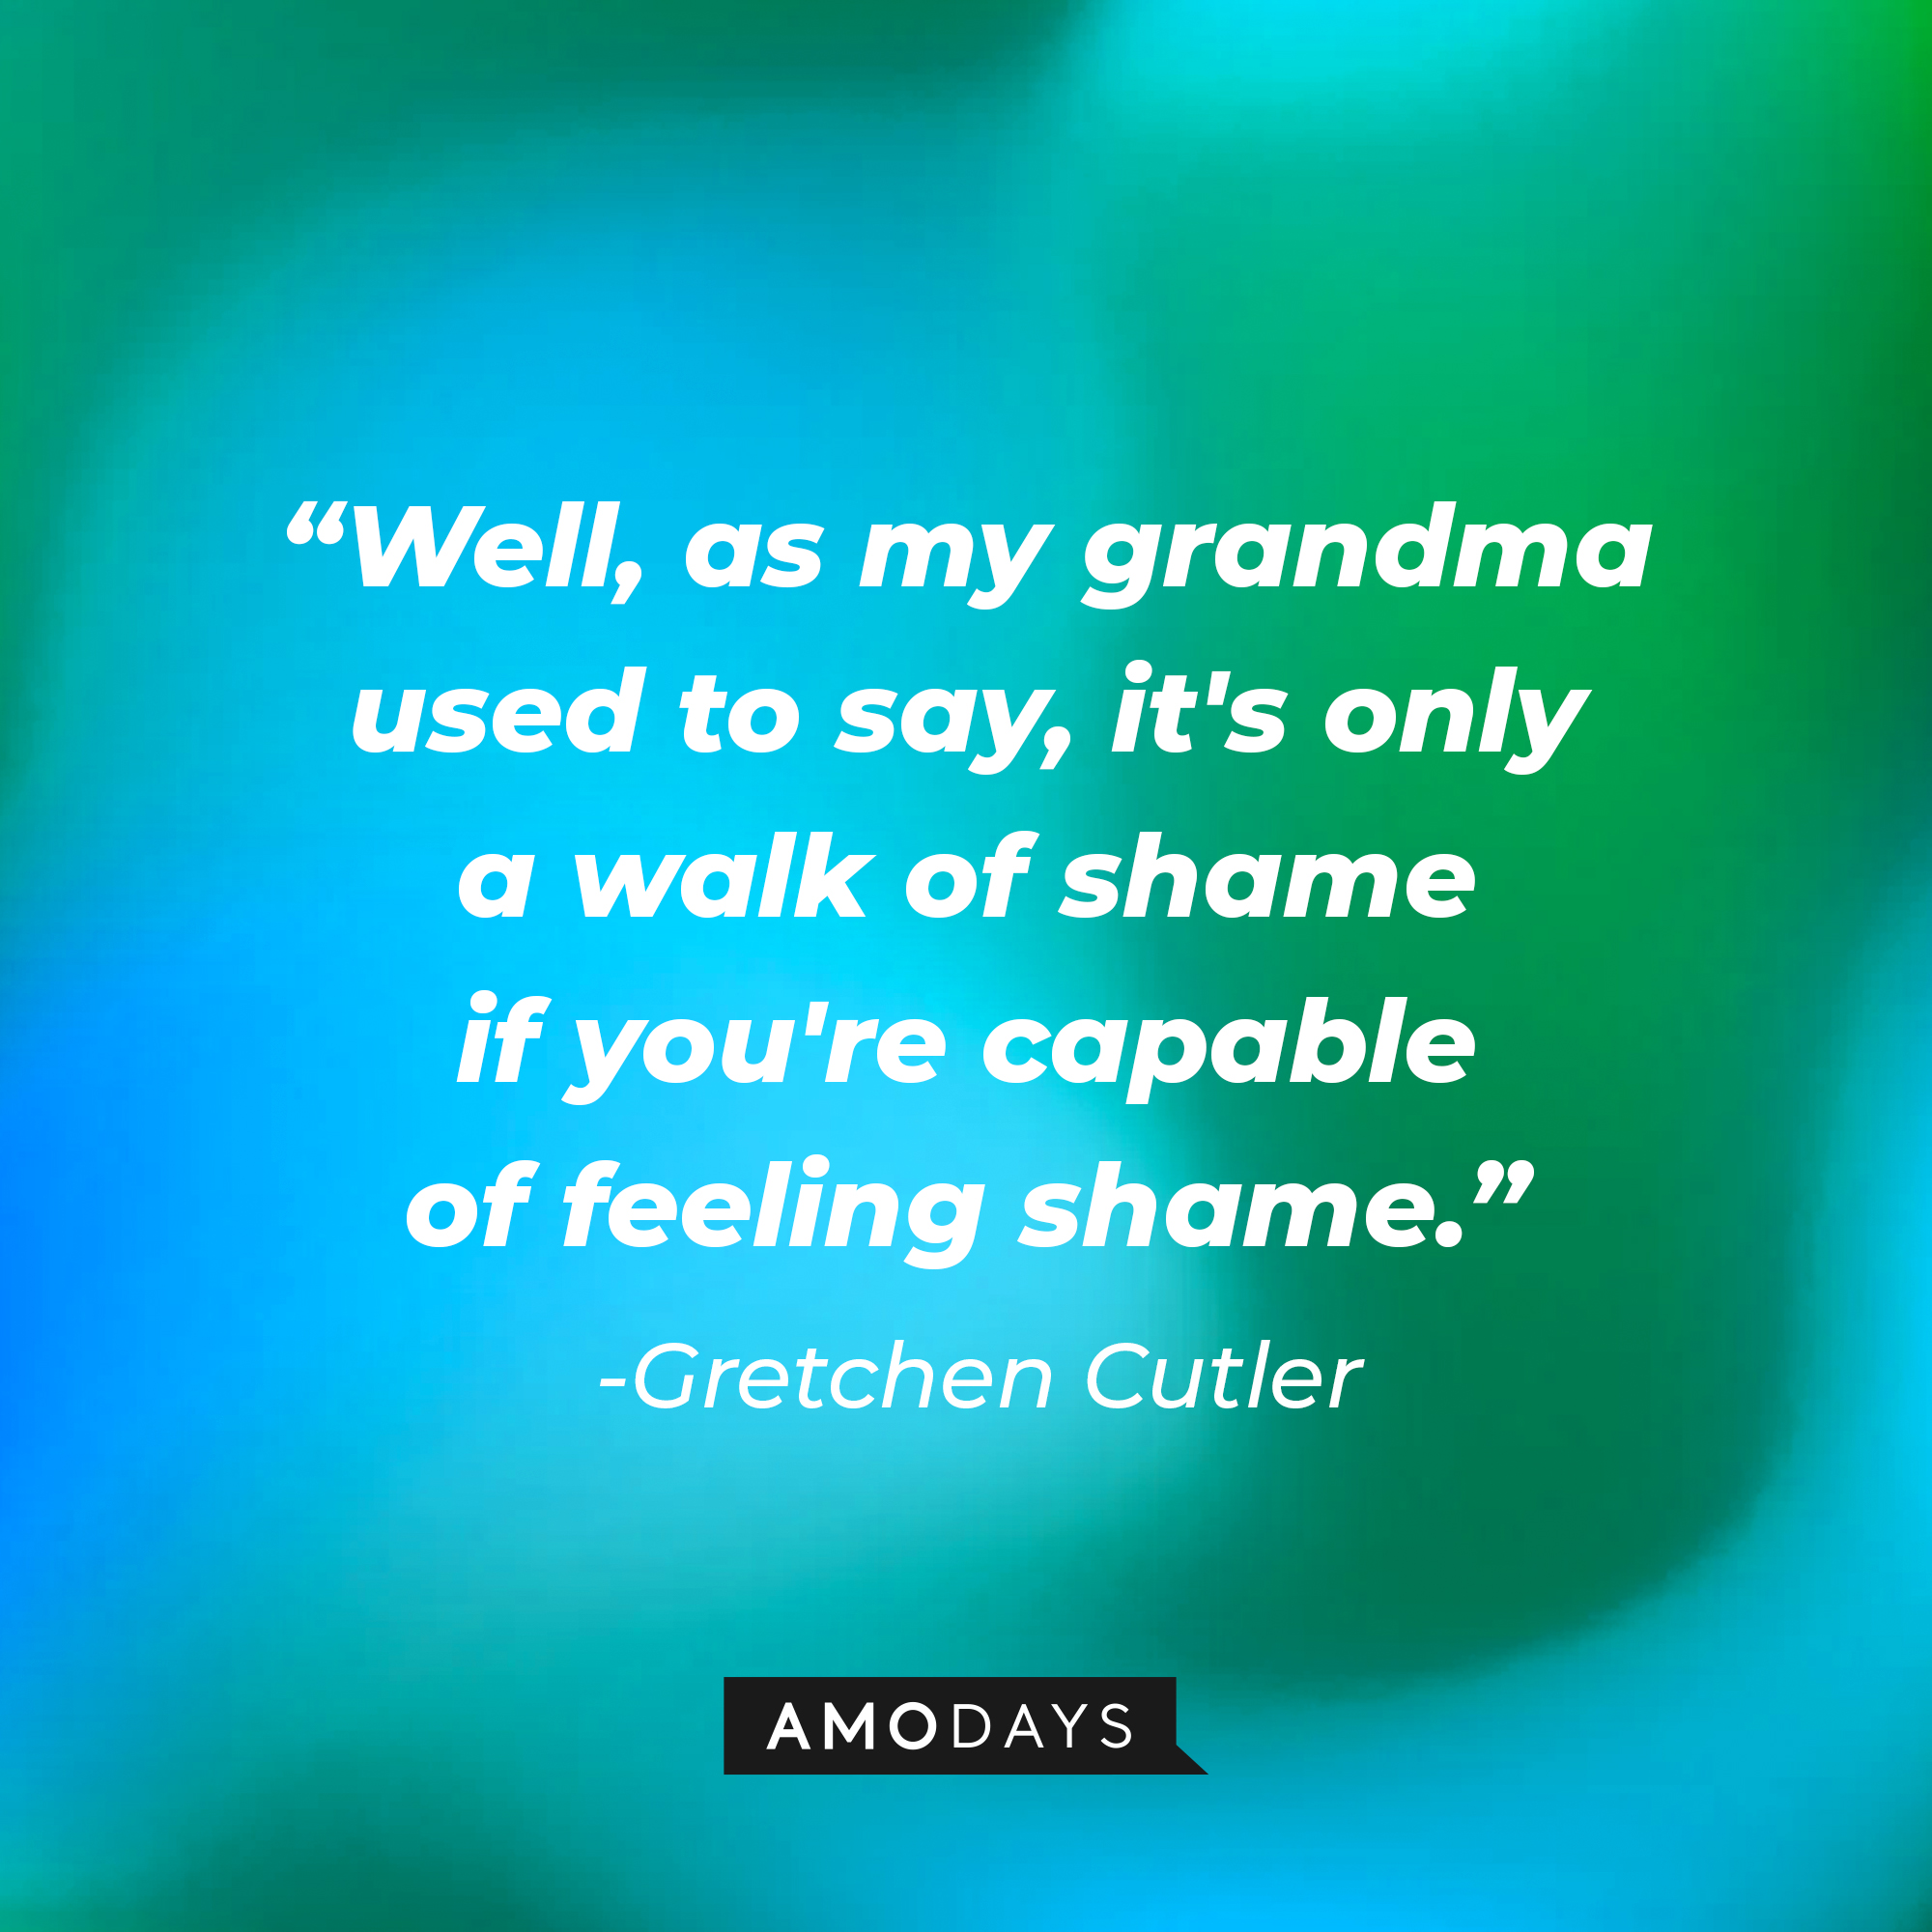 Gretchen Cutler’s quote: “Well, as my Grandma used to say, it's only a walk of shame if you're capable of feeling shame.” | Source: AmoDays